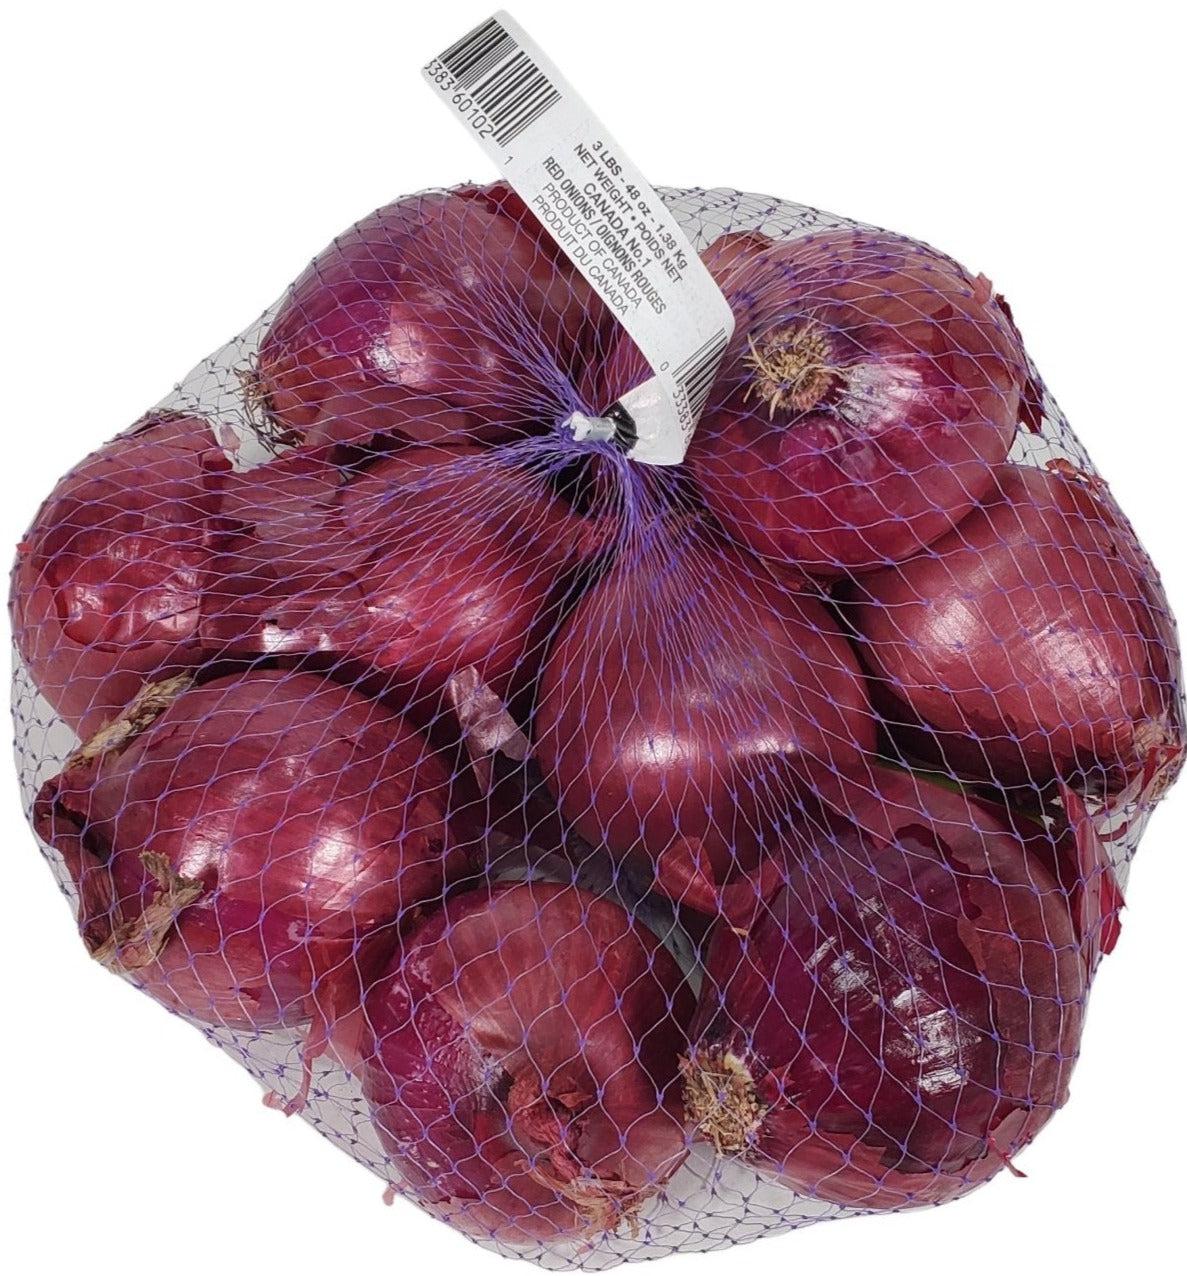 Country Fresh Red Onion 10LB